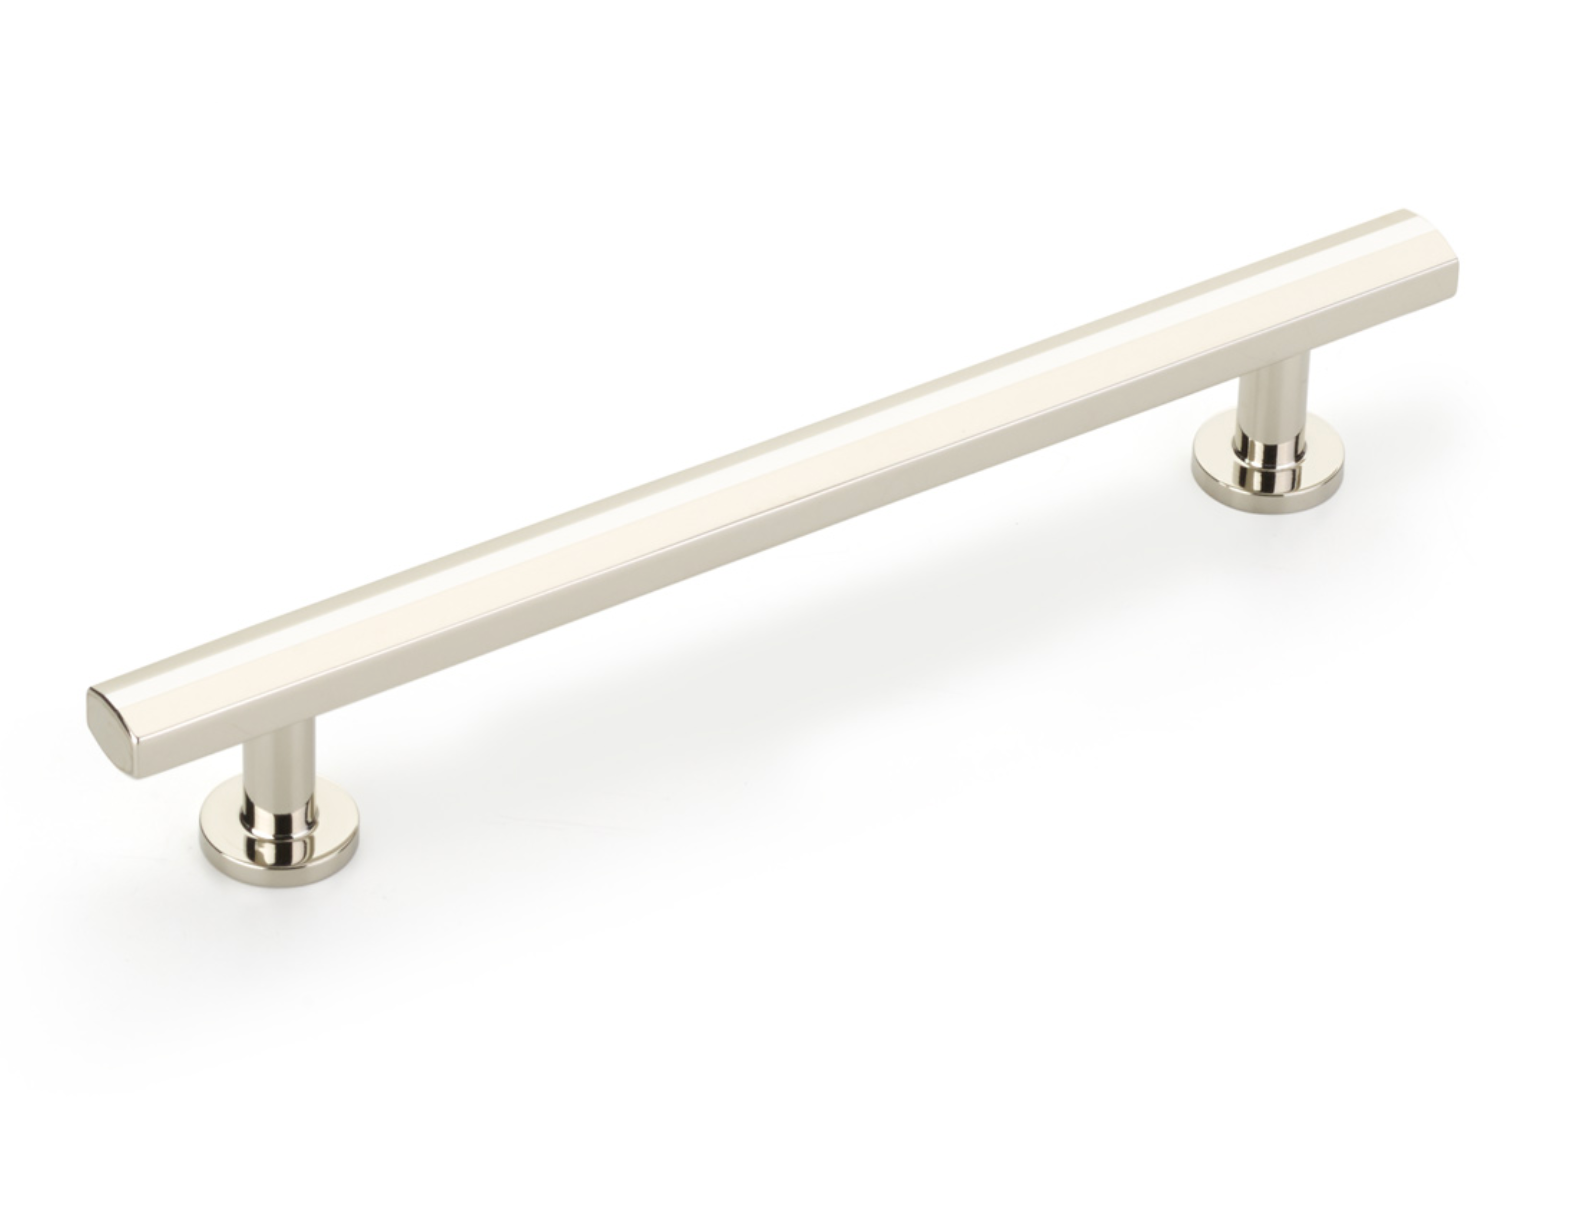 Polished Nickel "Heather" T-Bar Cabinet Knobs and Drawer Pulls